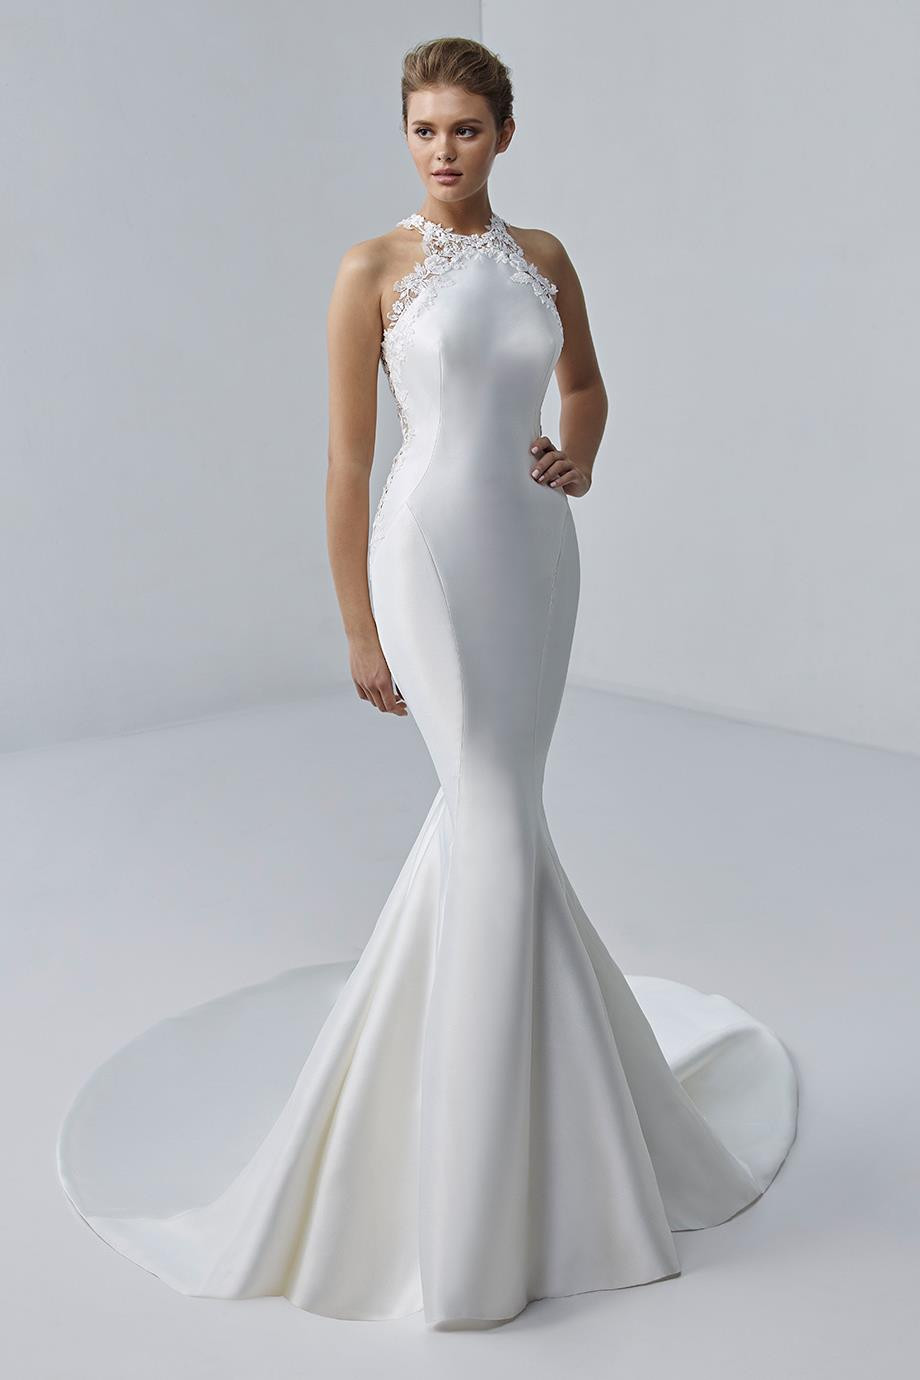 Camille Wedding Dress from ETOILE hitched.co.uk